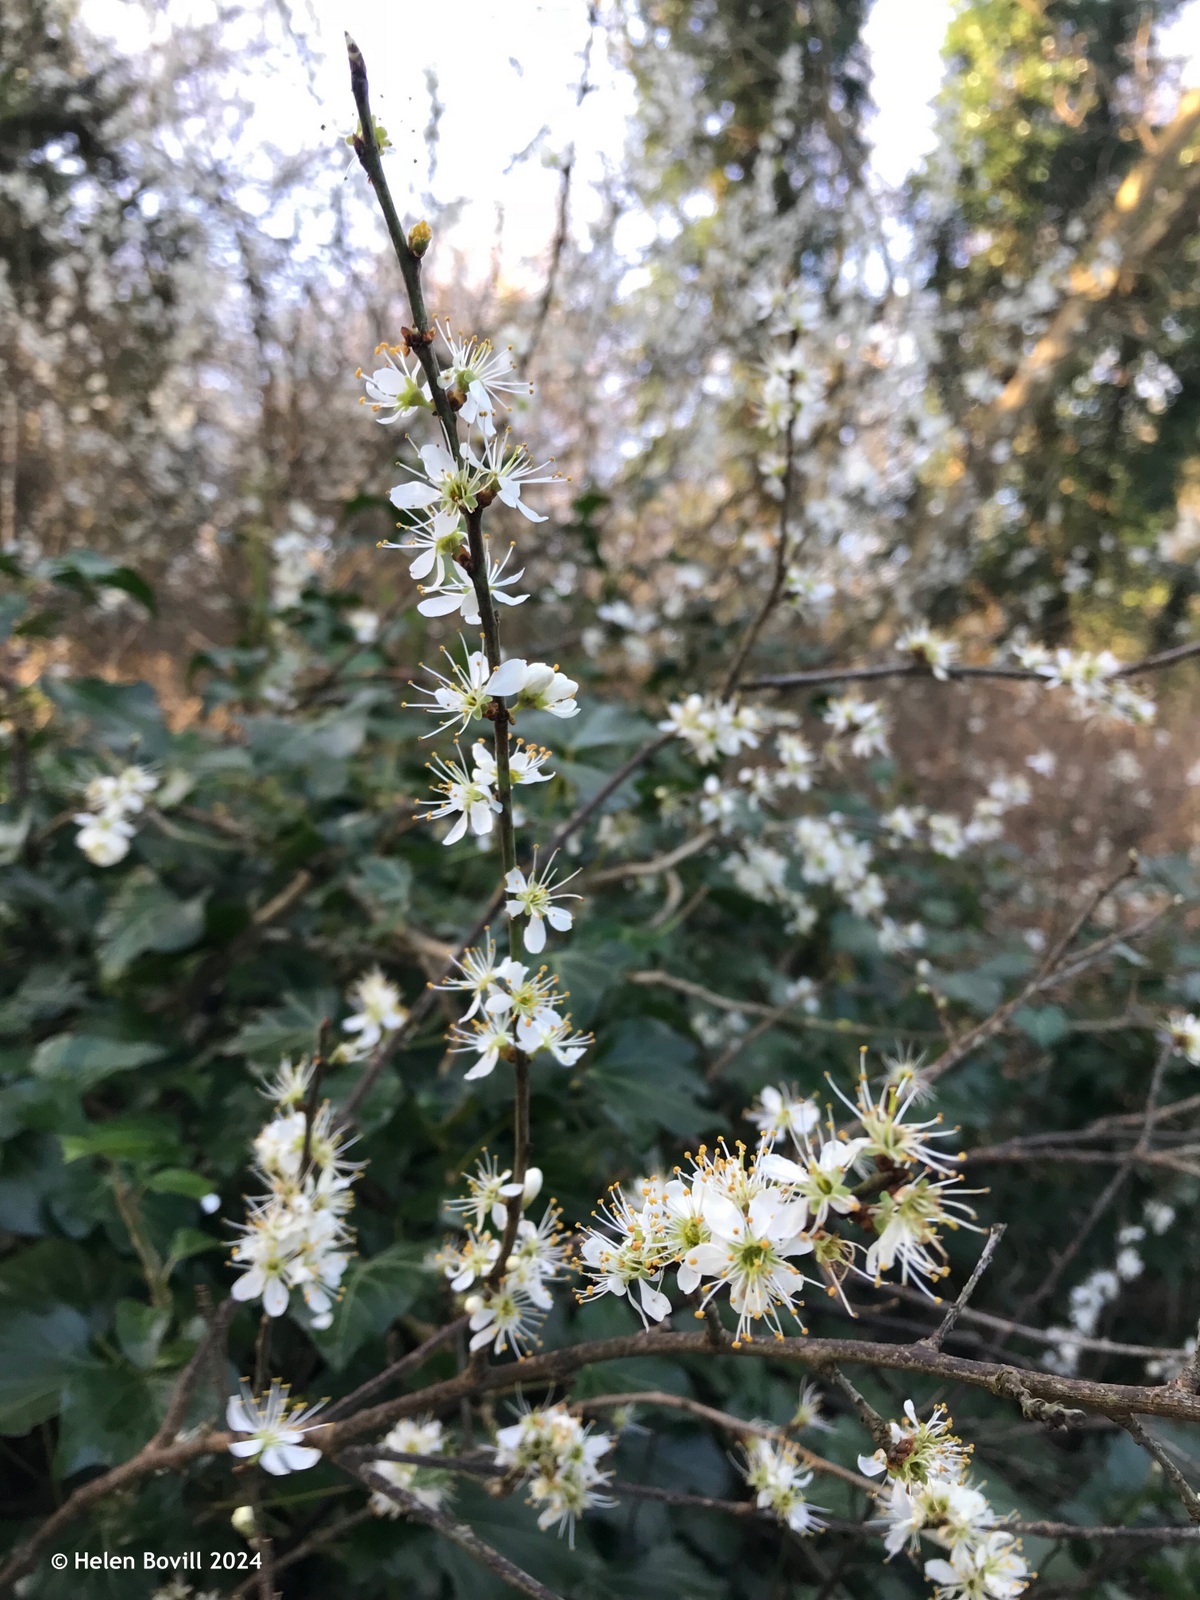 The white flowers of the blackthorn tree inside the cemetery